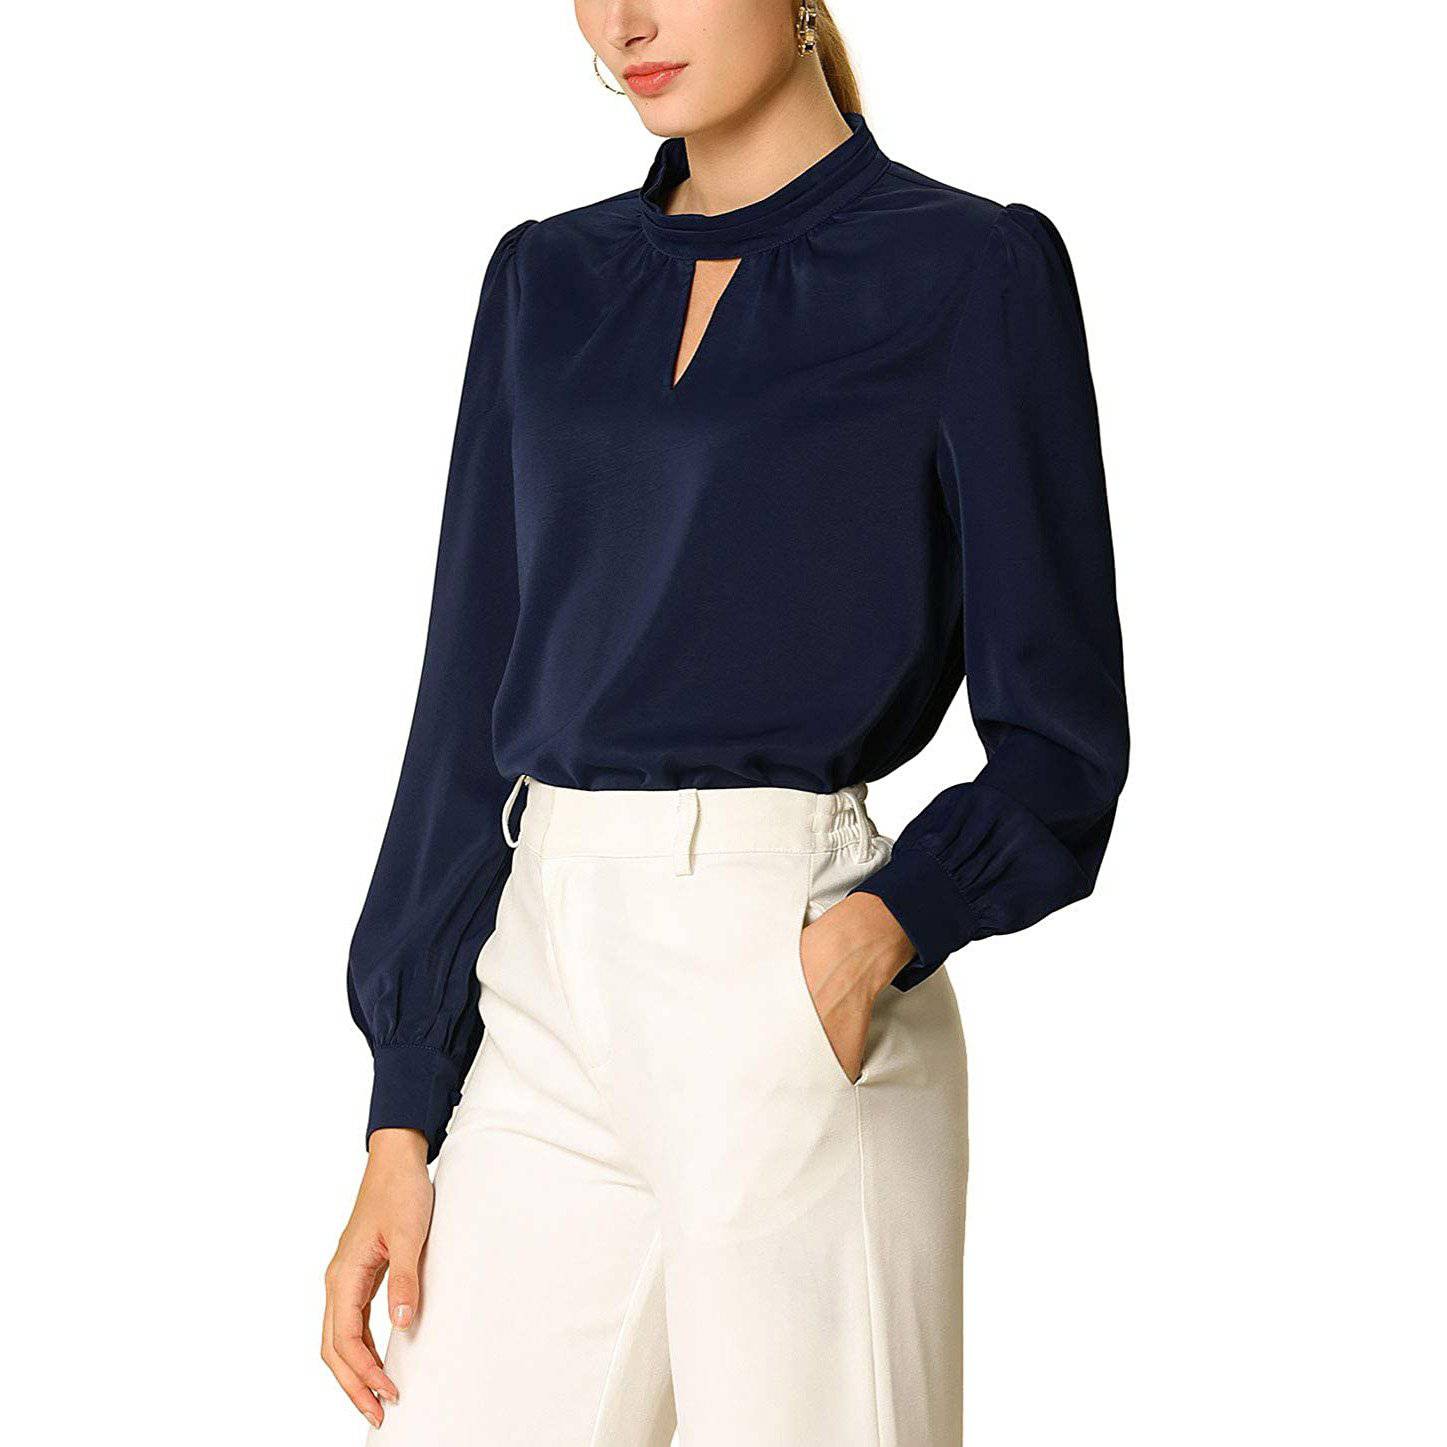 Women's Blouses Elegant Plain Top Stand Collar Fake Buttons Long Sleeve  Blue S